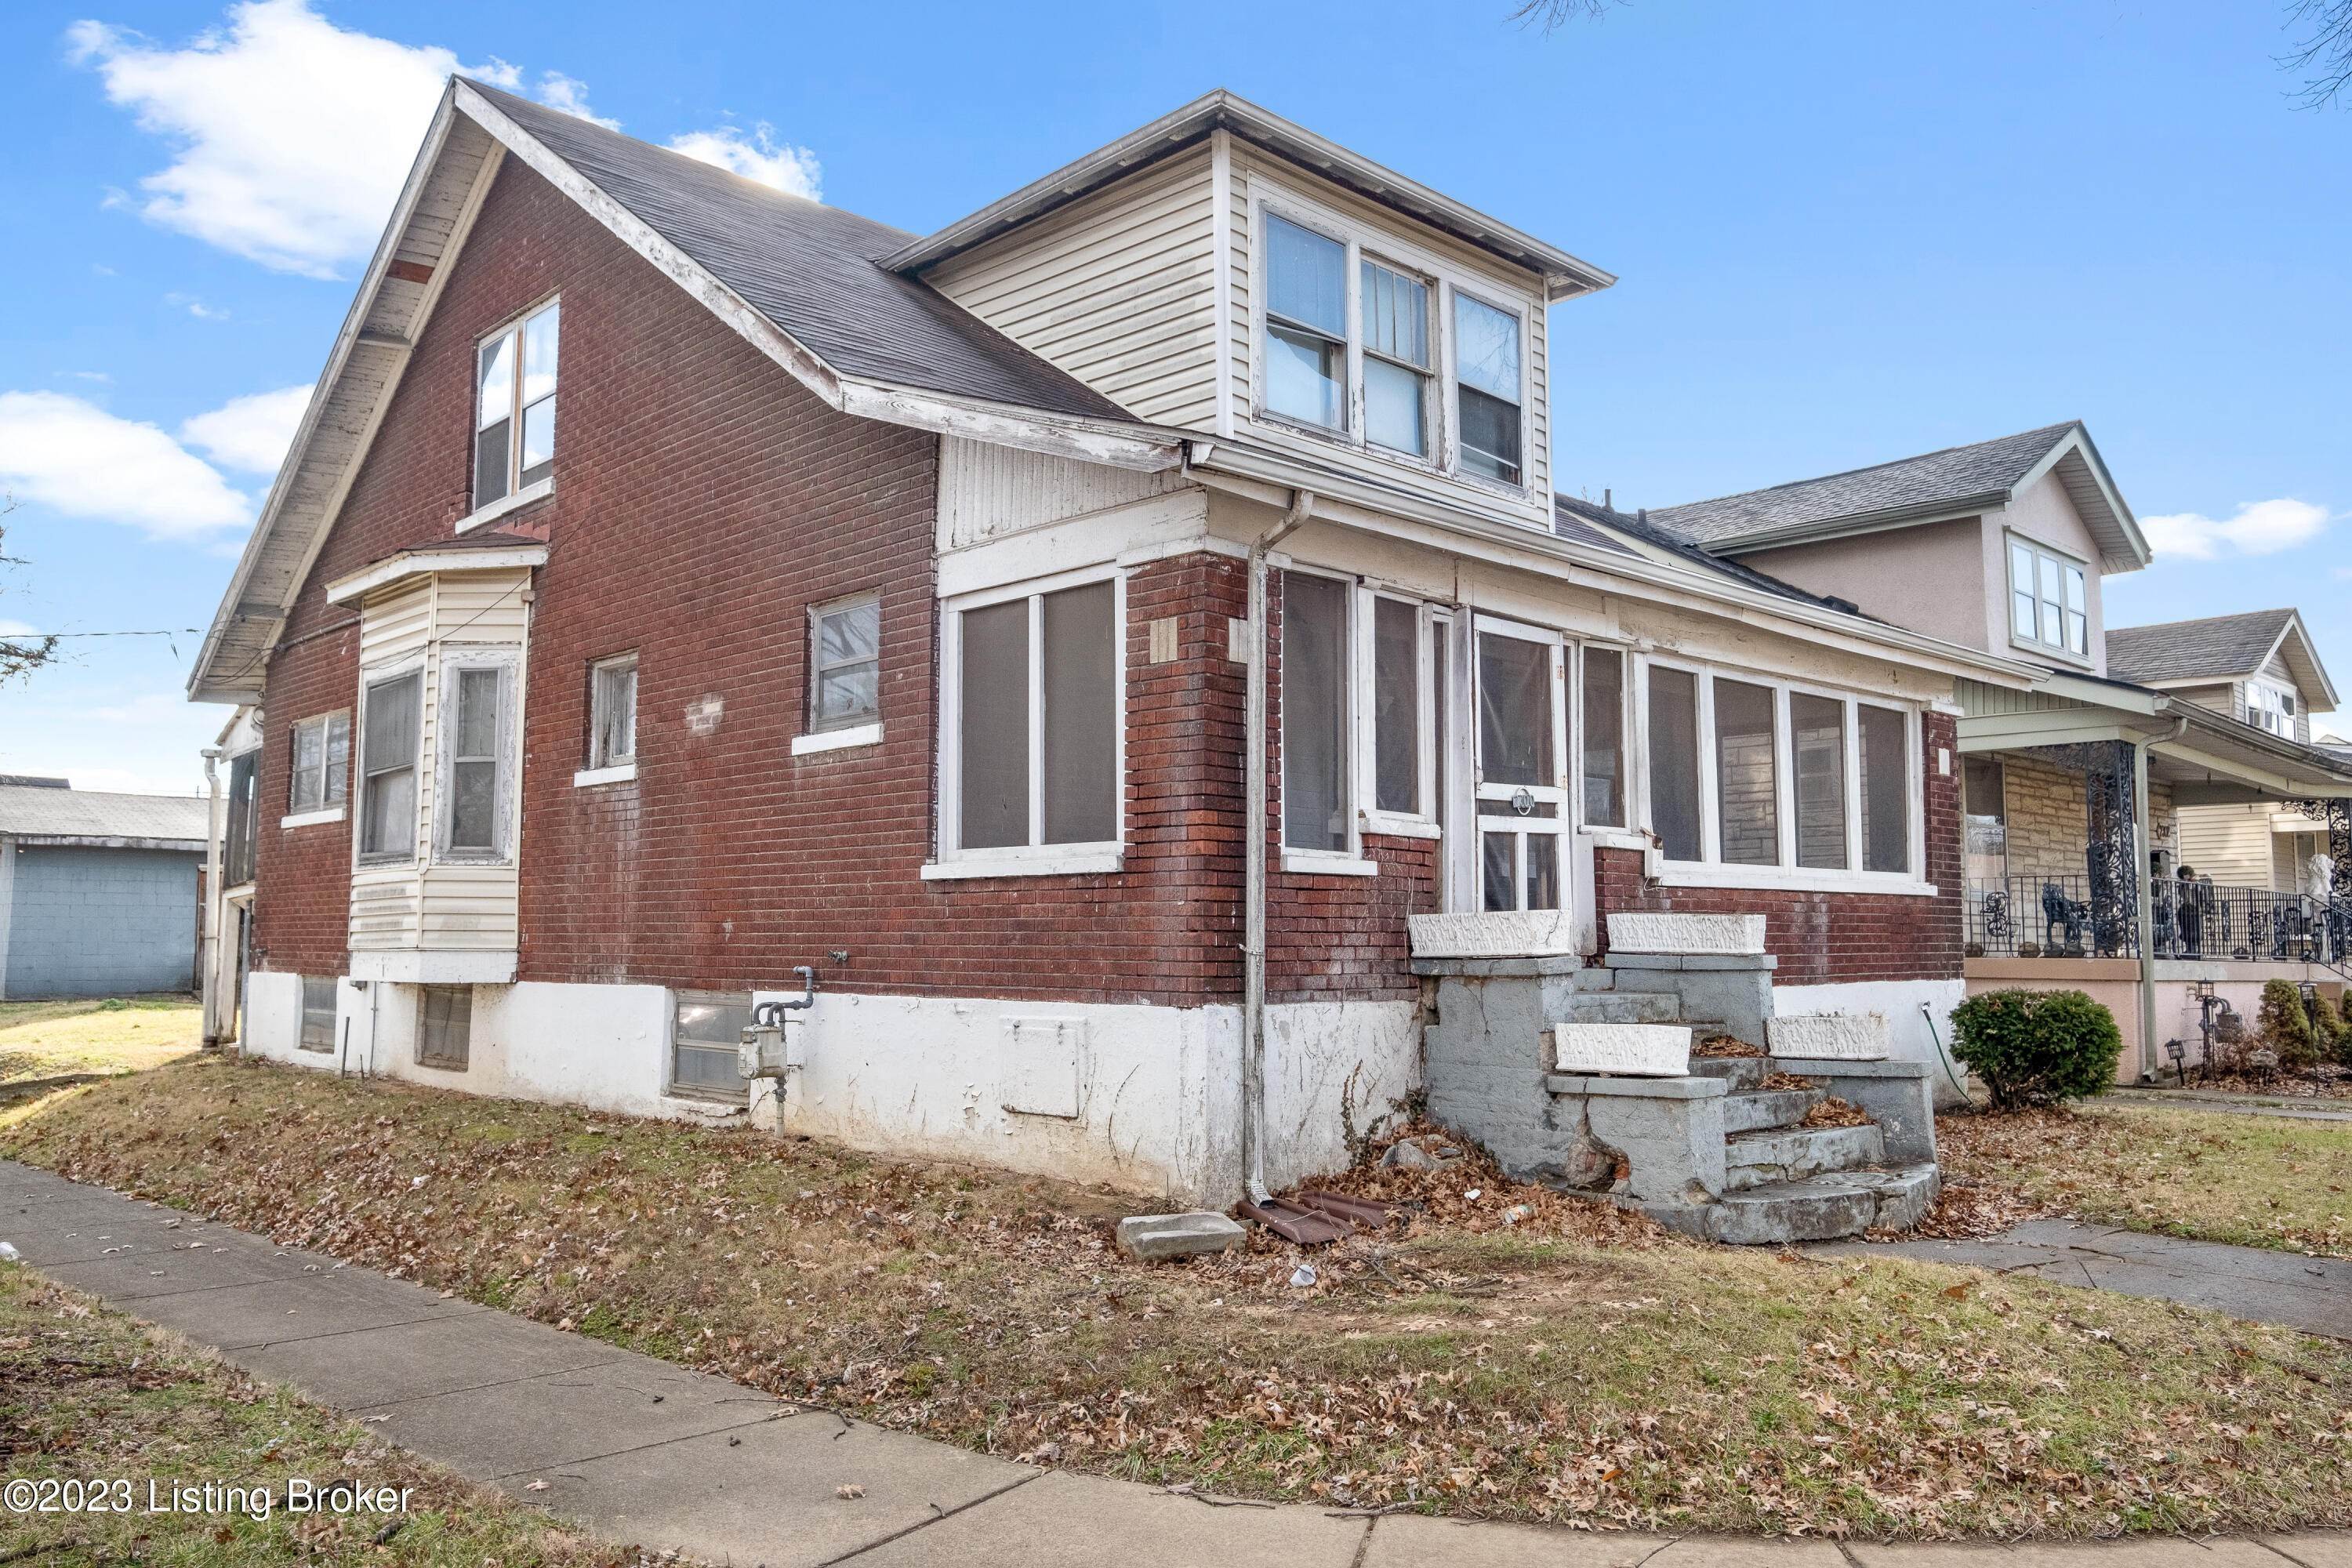 24. Single Family at Louisville, KY 40210